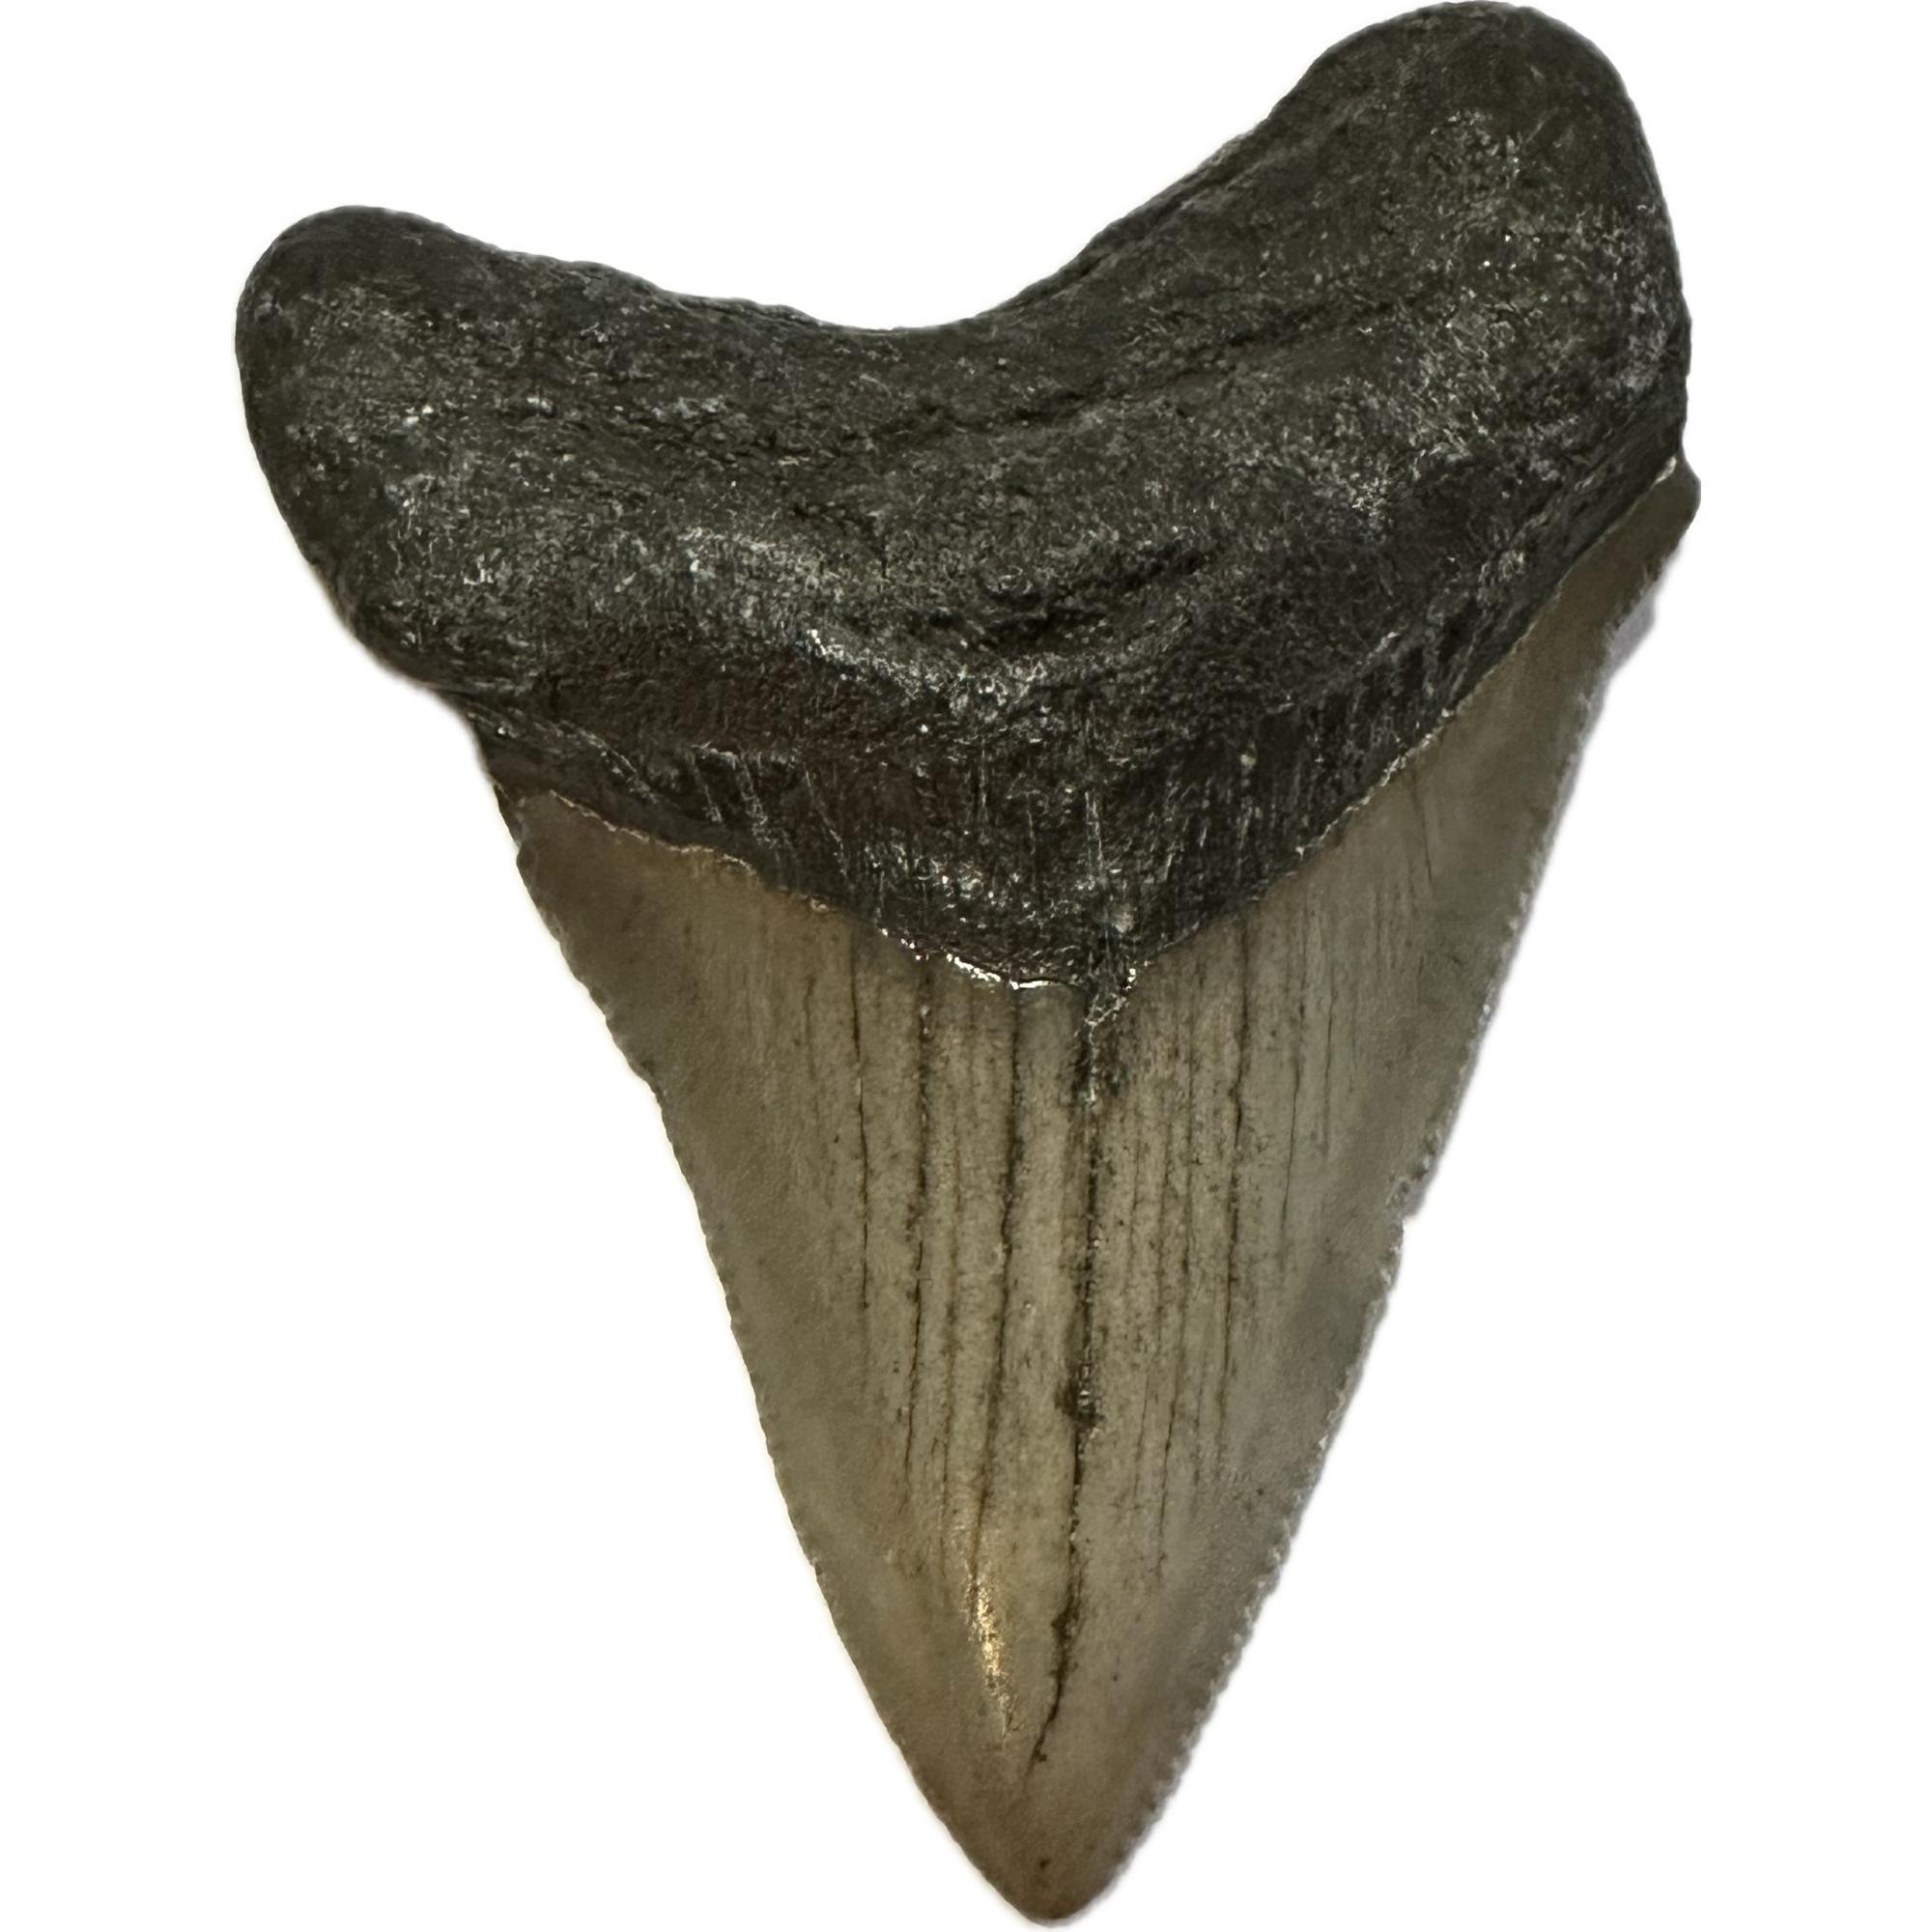 Beautiful megalodon tooth measuring 2.76 inches a beautiful, gray color and wonderful stations